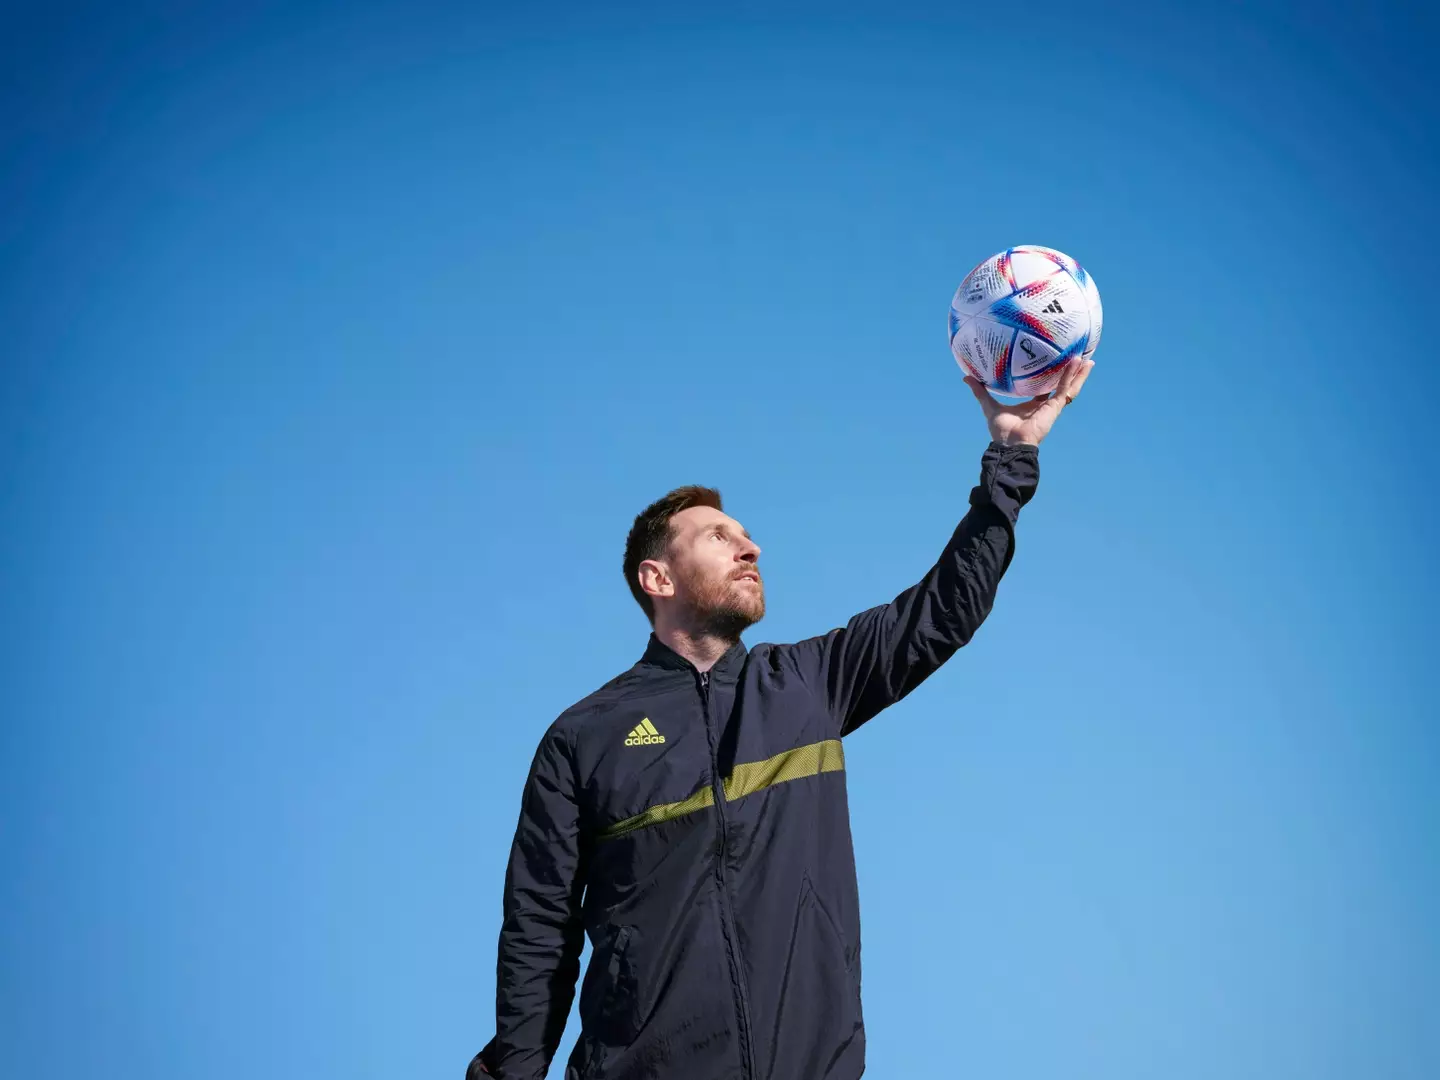 Messi has become the face of Adidas. Image: Alamy